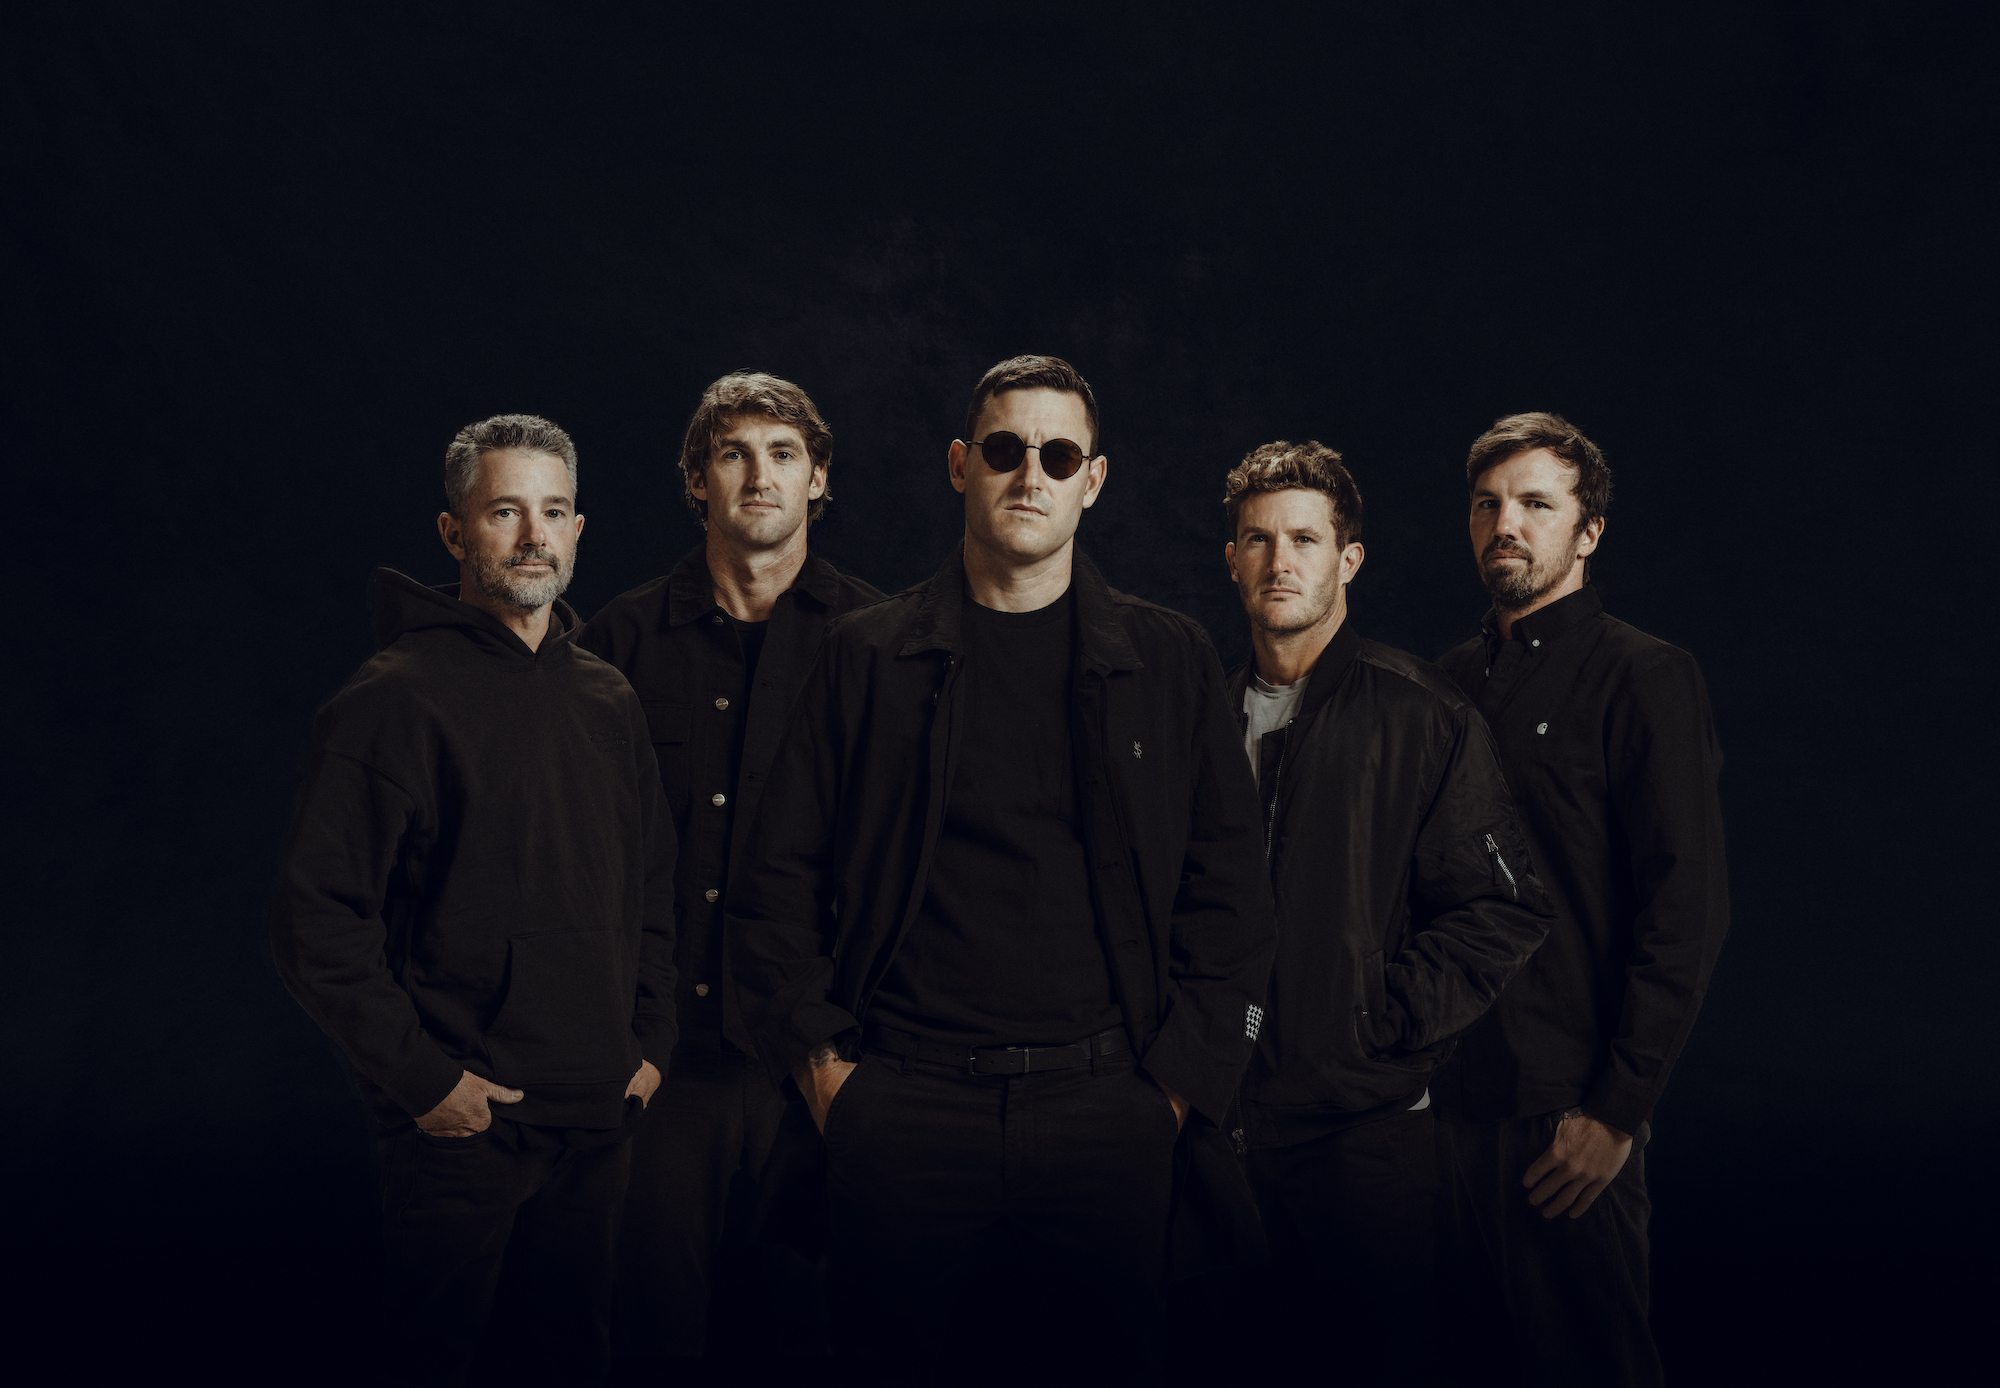 PARKWAY DRIVE ANNOUNCE NEW ALBUM DARKER STILL + SHARE NEW VIDEO “THE GREATEST FEAR”